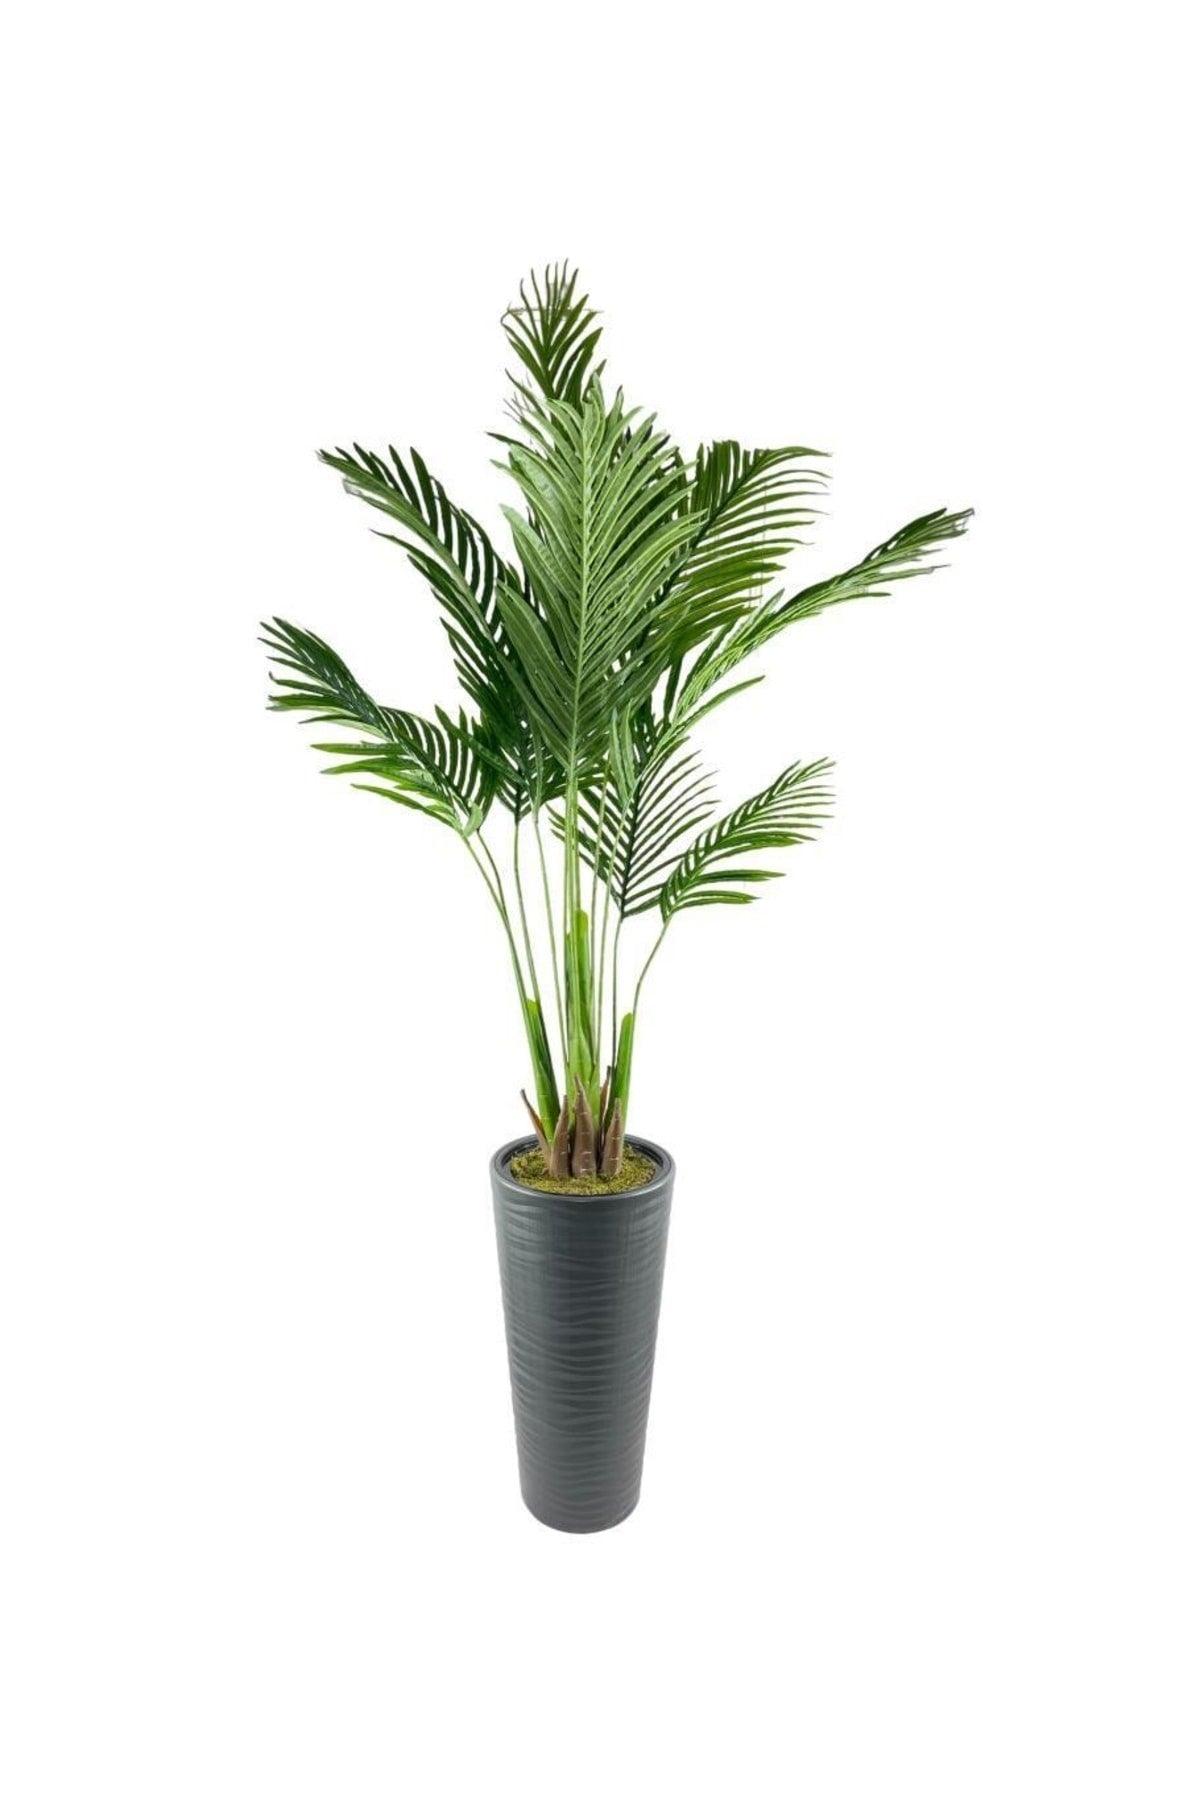 Artificial Tree Areca Tree Anthracite Tall Beach Palm Tree In Vase Artificial Areka 190cm - Swordslife